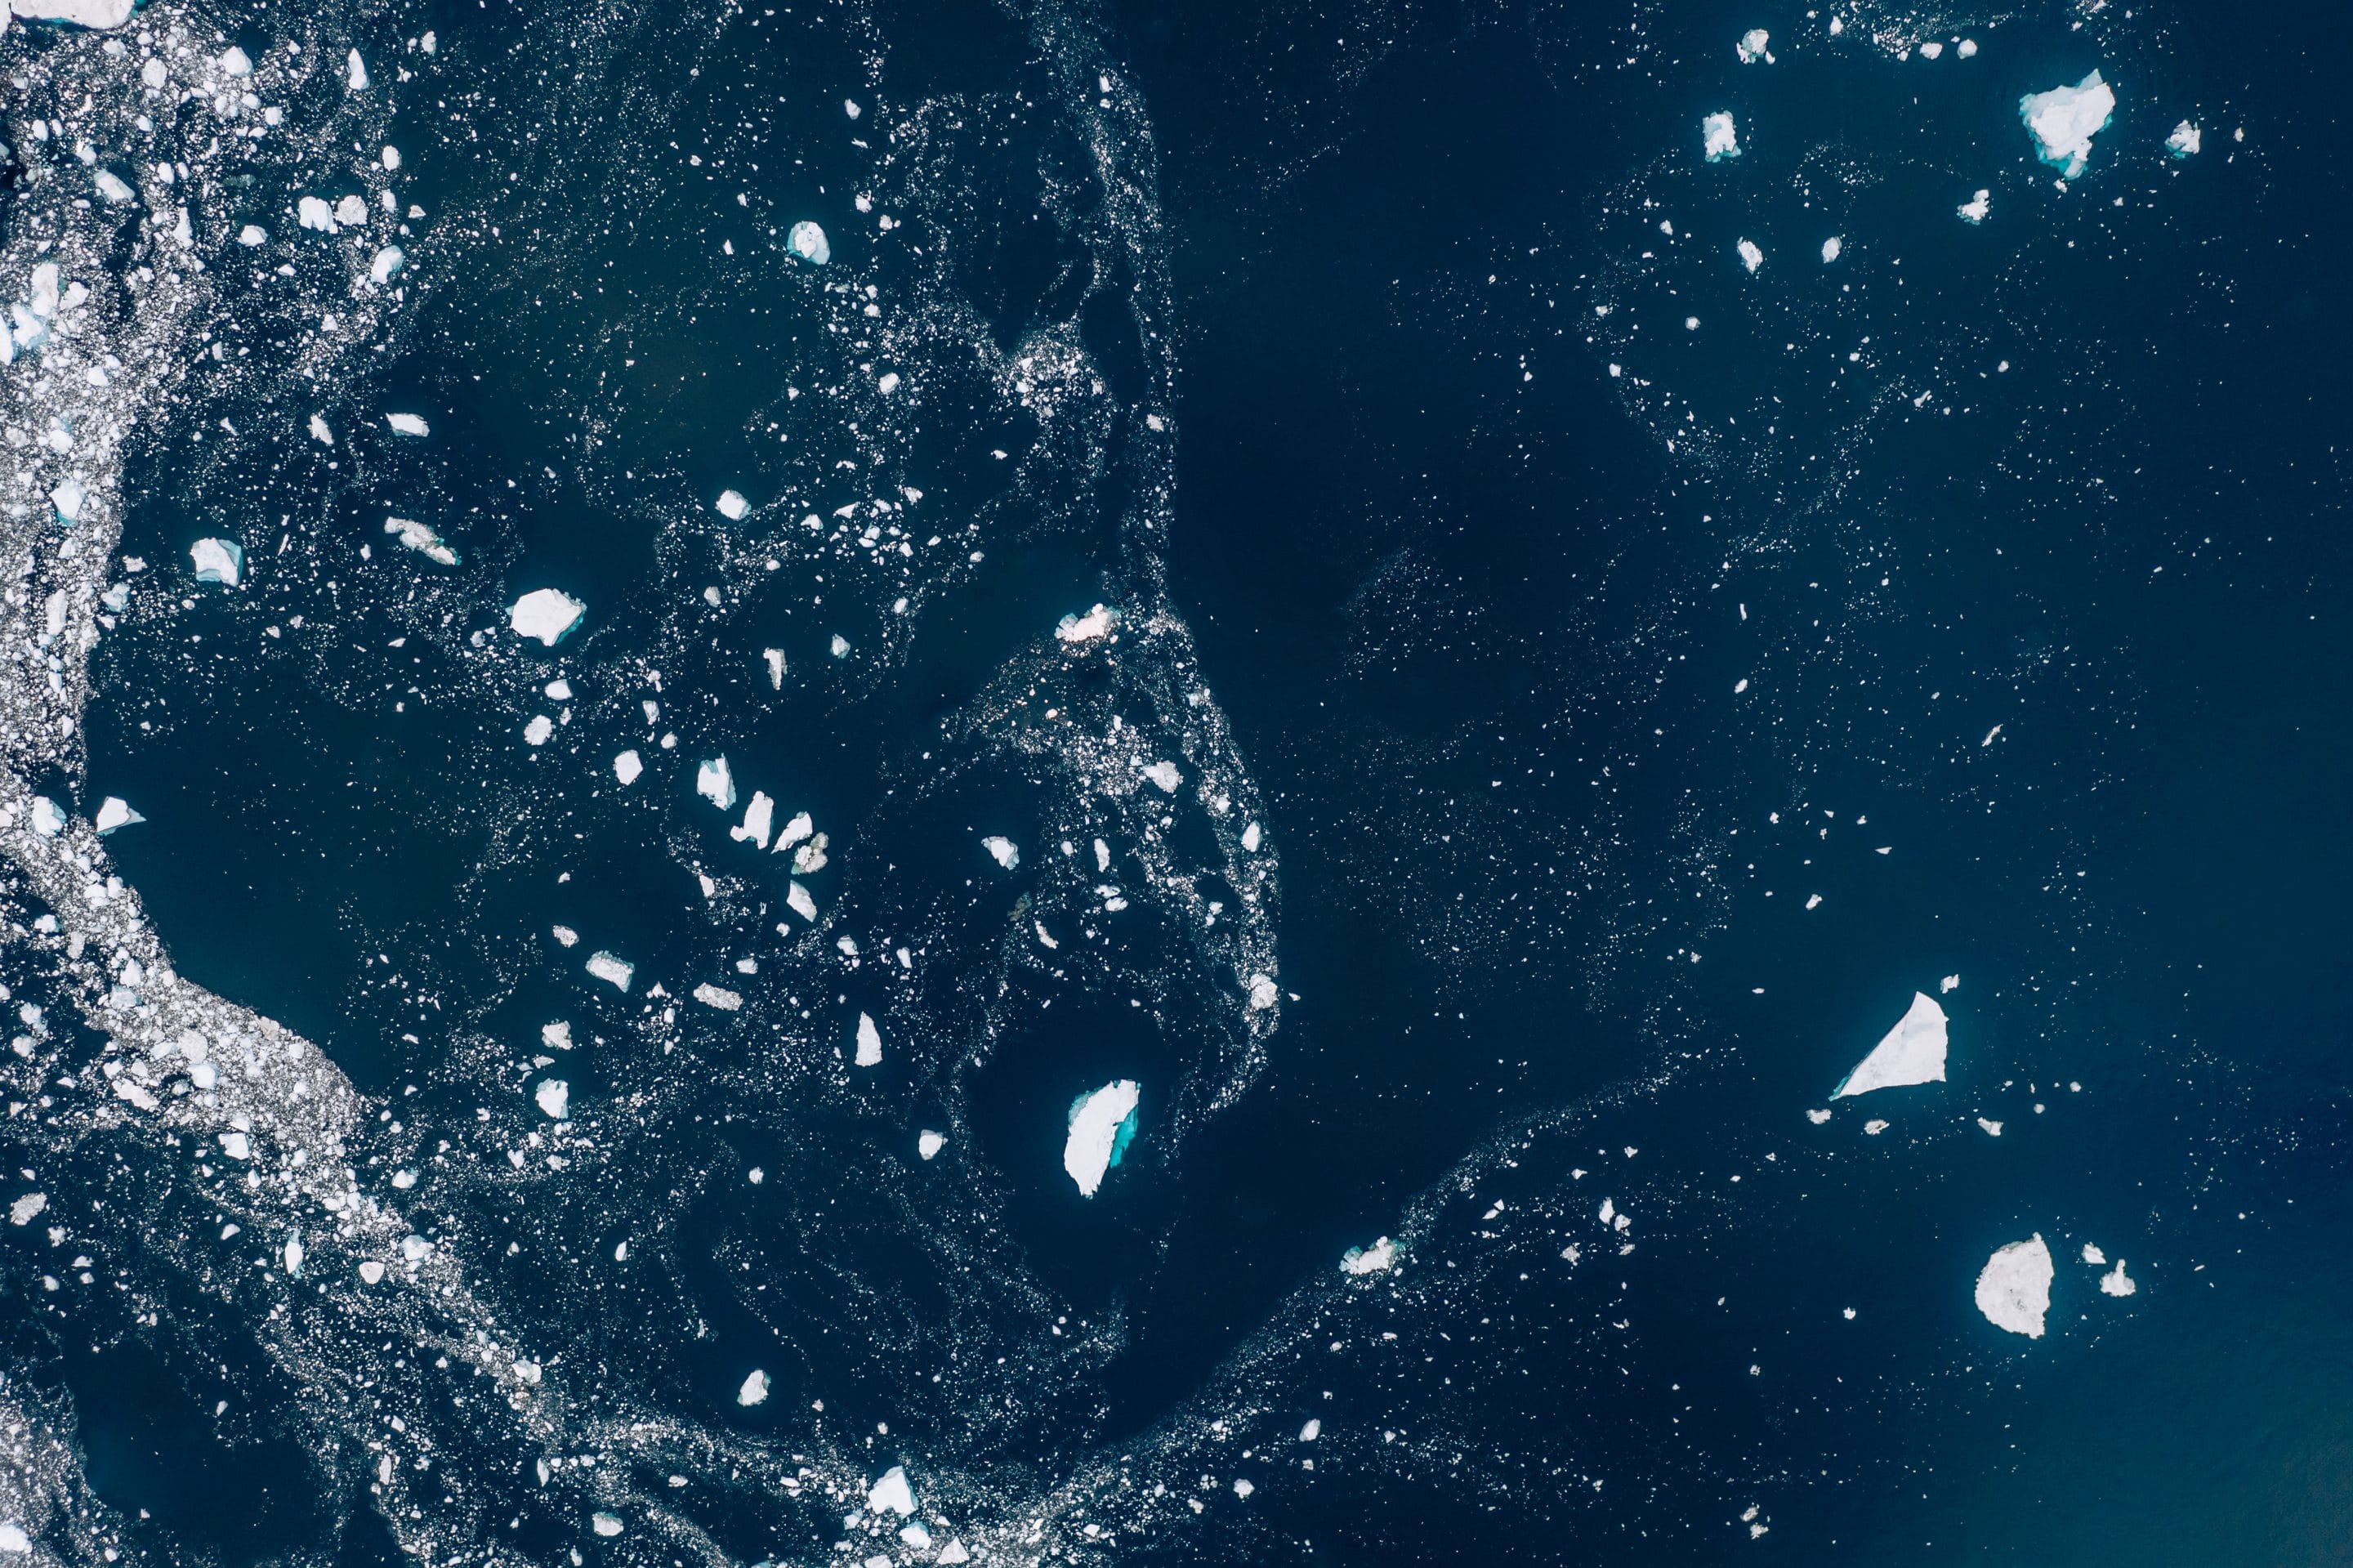 Fine art aerial photography series that sees the sea ice in Greenland as stars and galaxies that are forming a universe in the calm Atlantic ocean by Michael Schauer